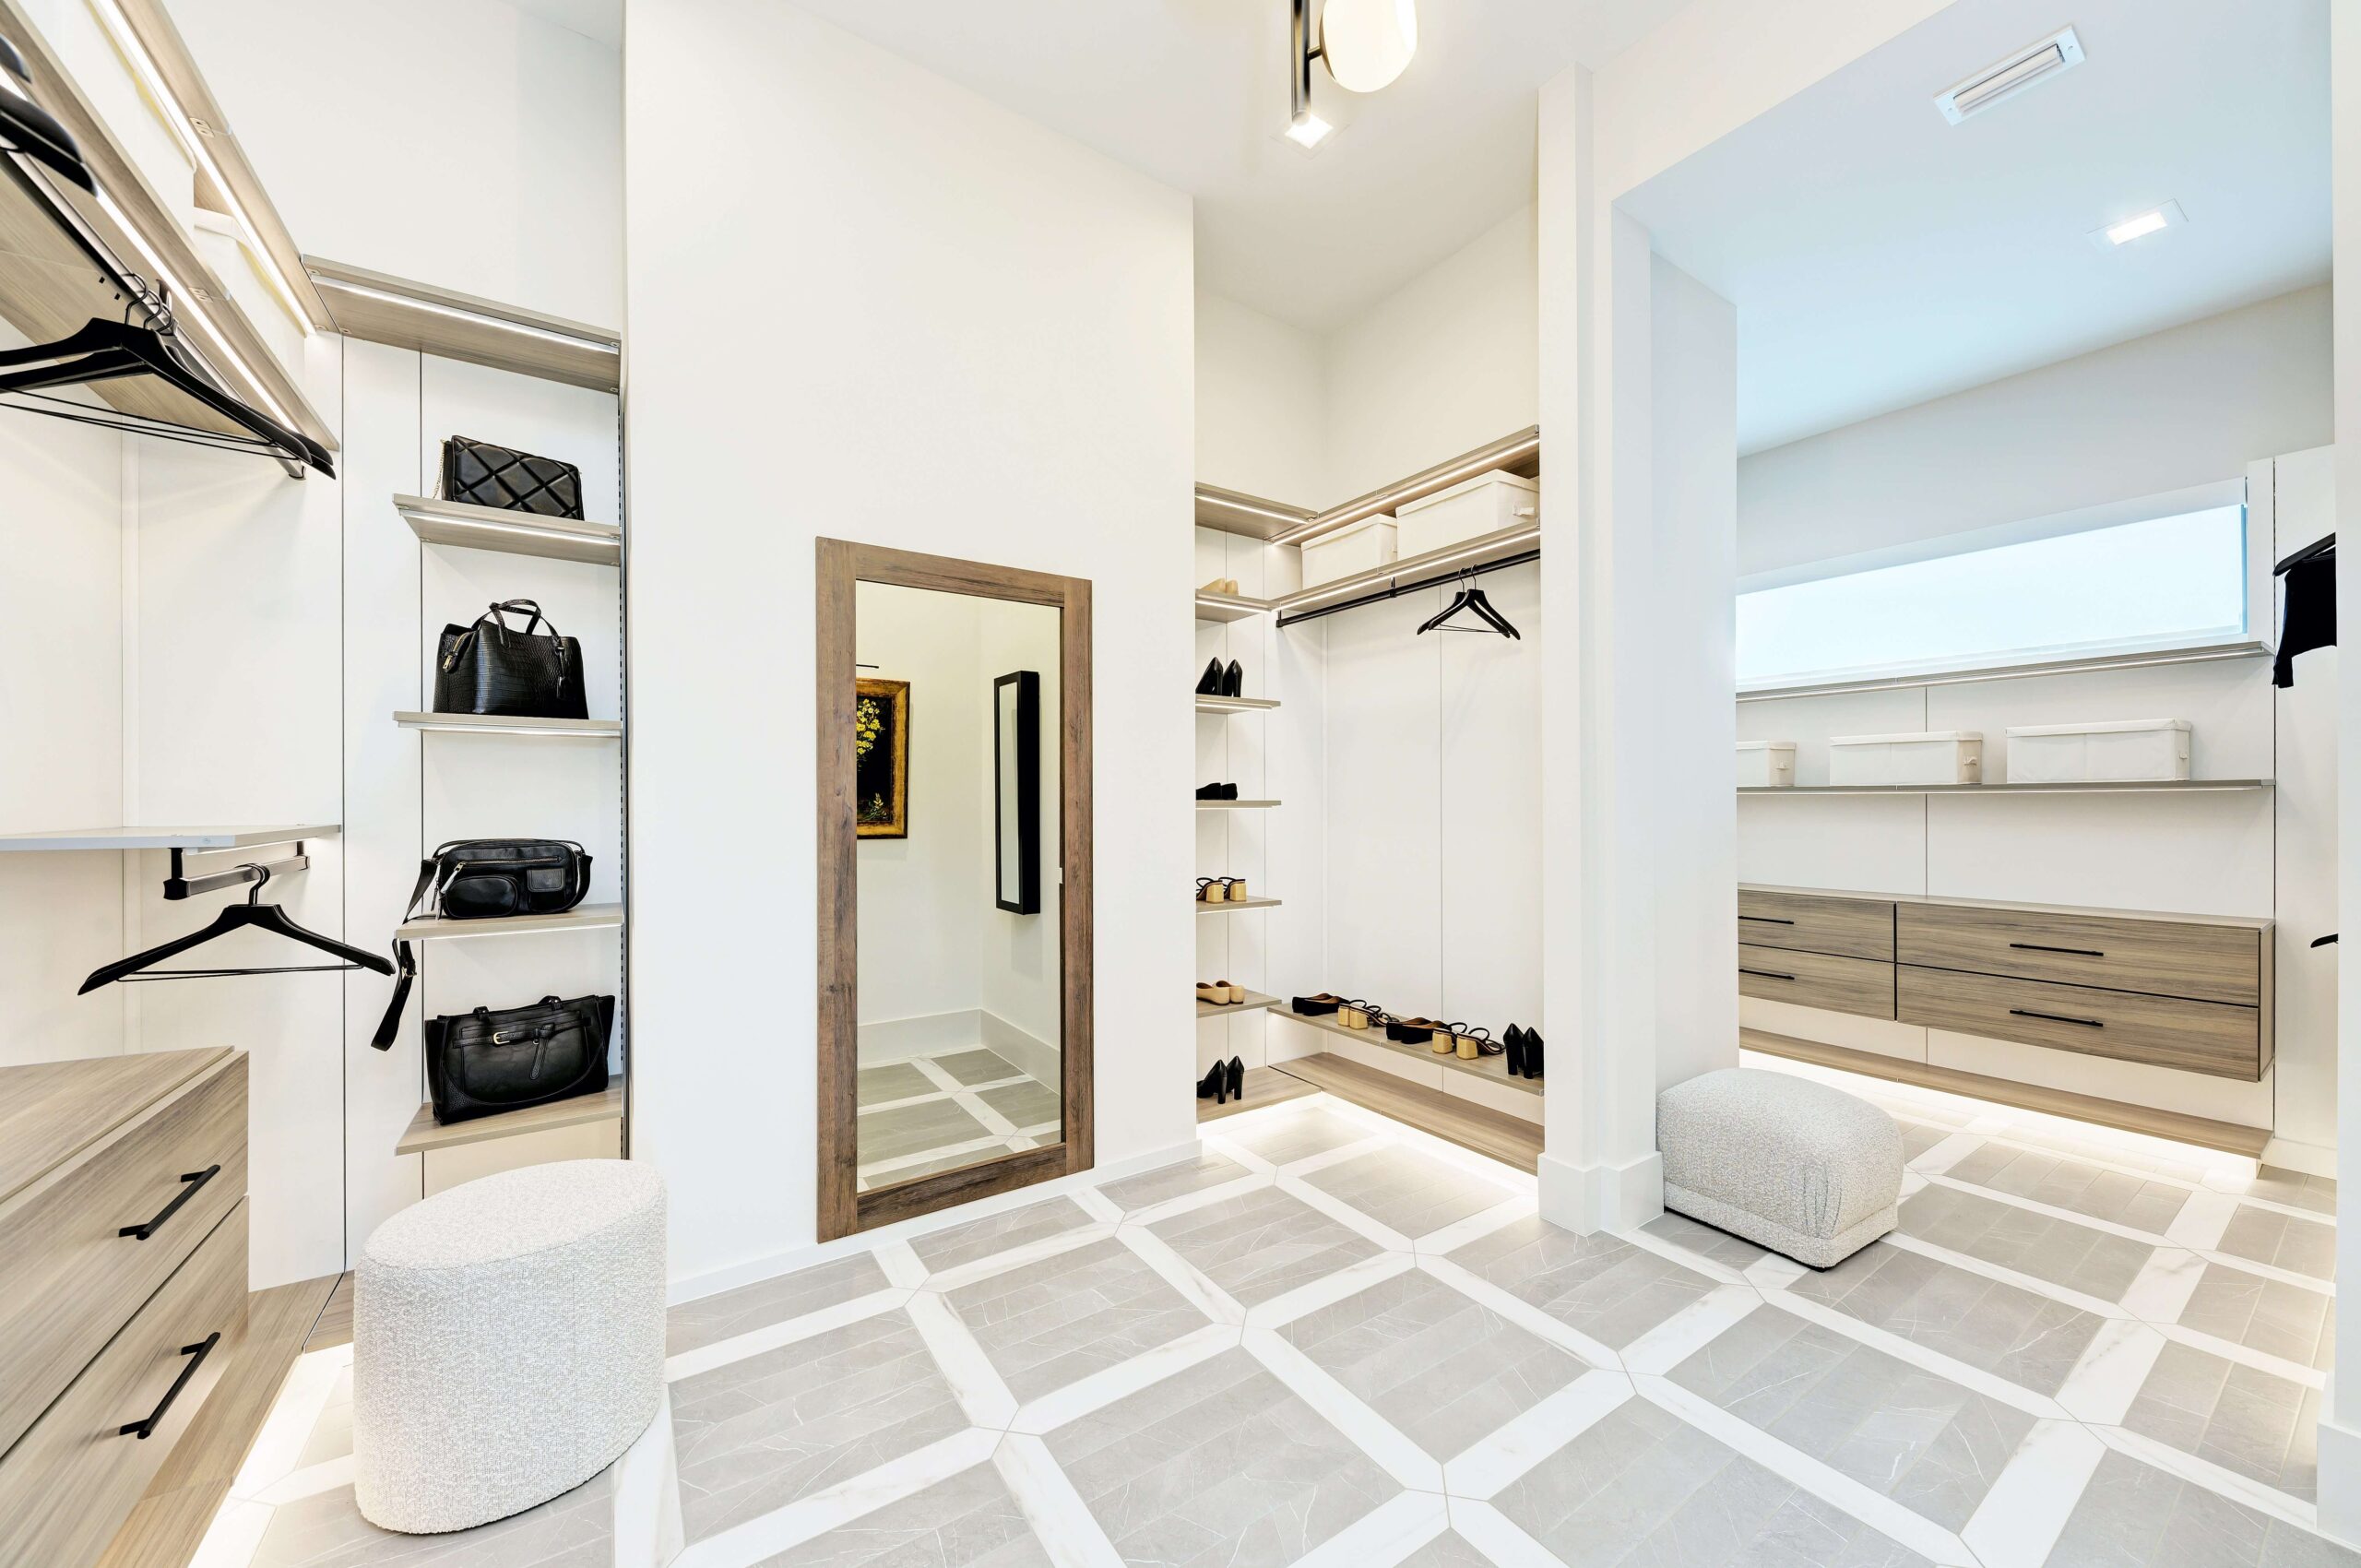 Builders Design: Pantry and Closet Trends to Consider for a Clean, Organized Custom Home